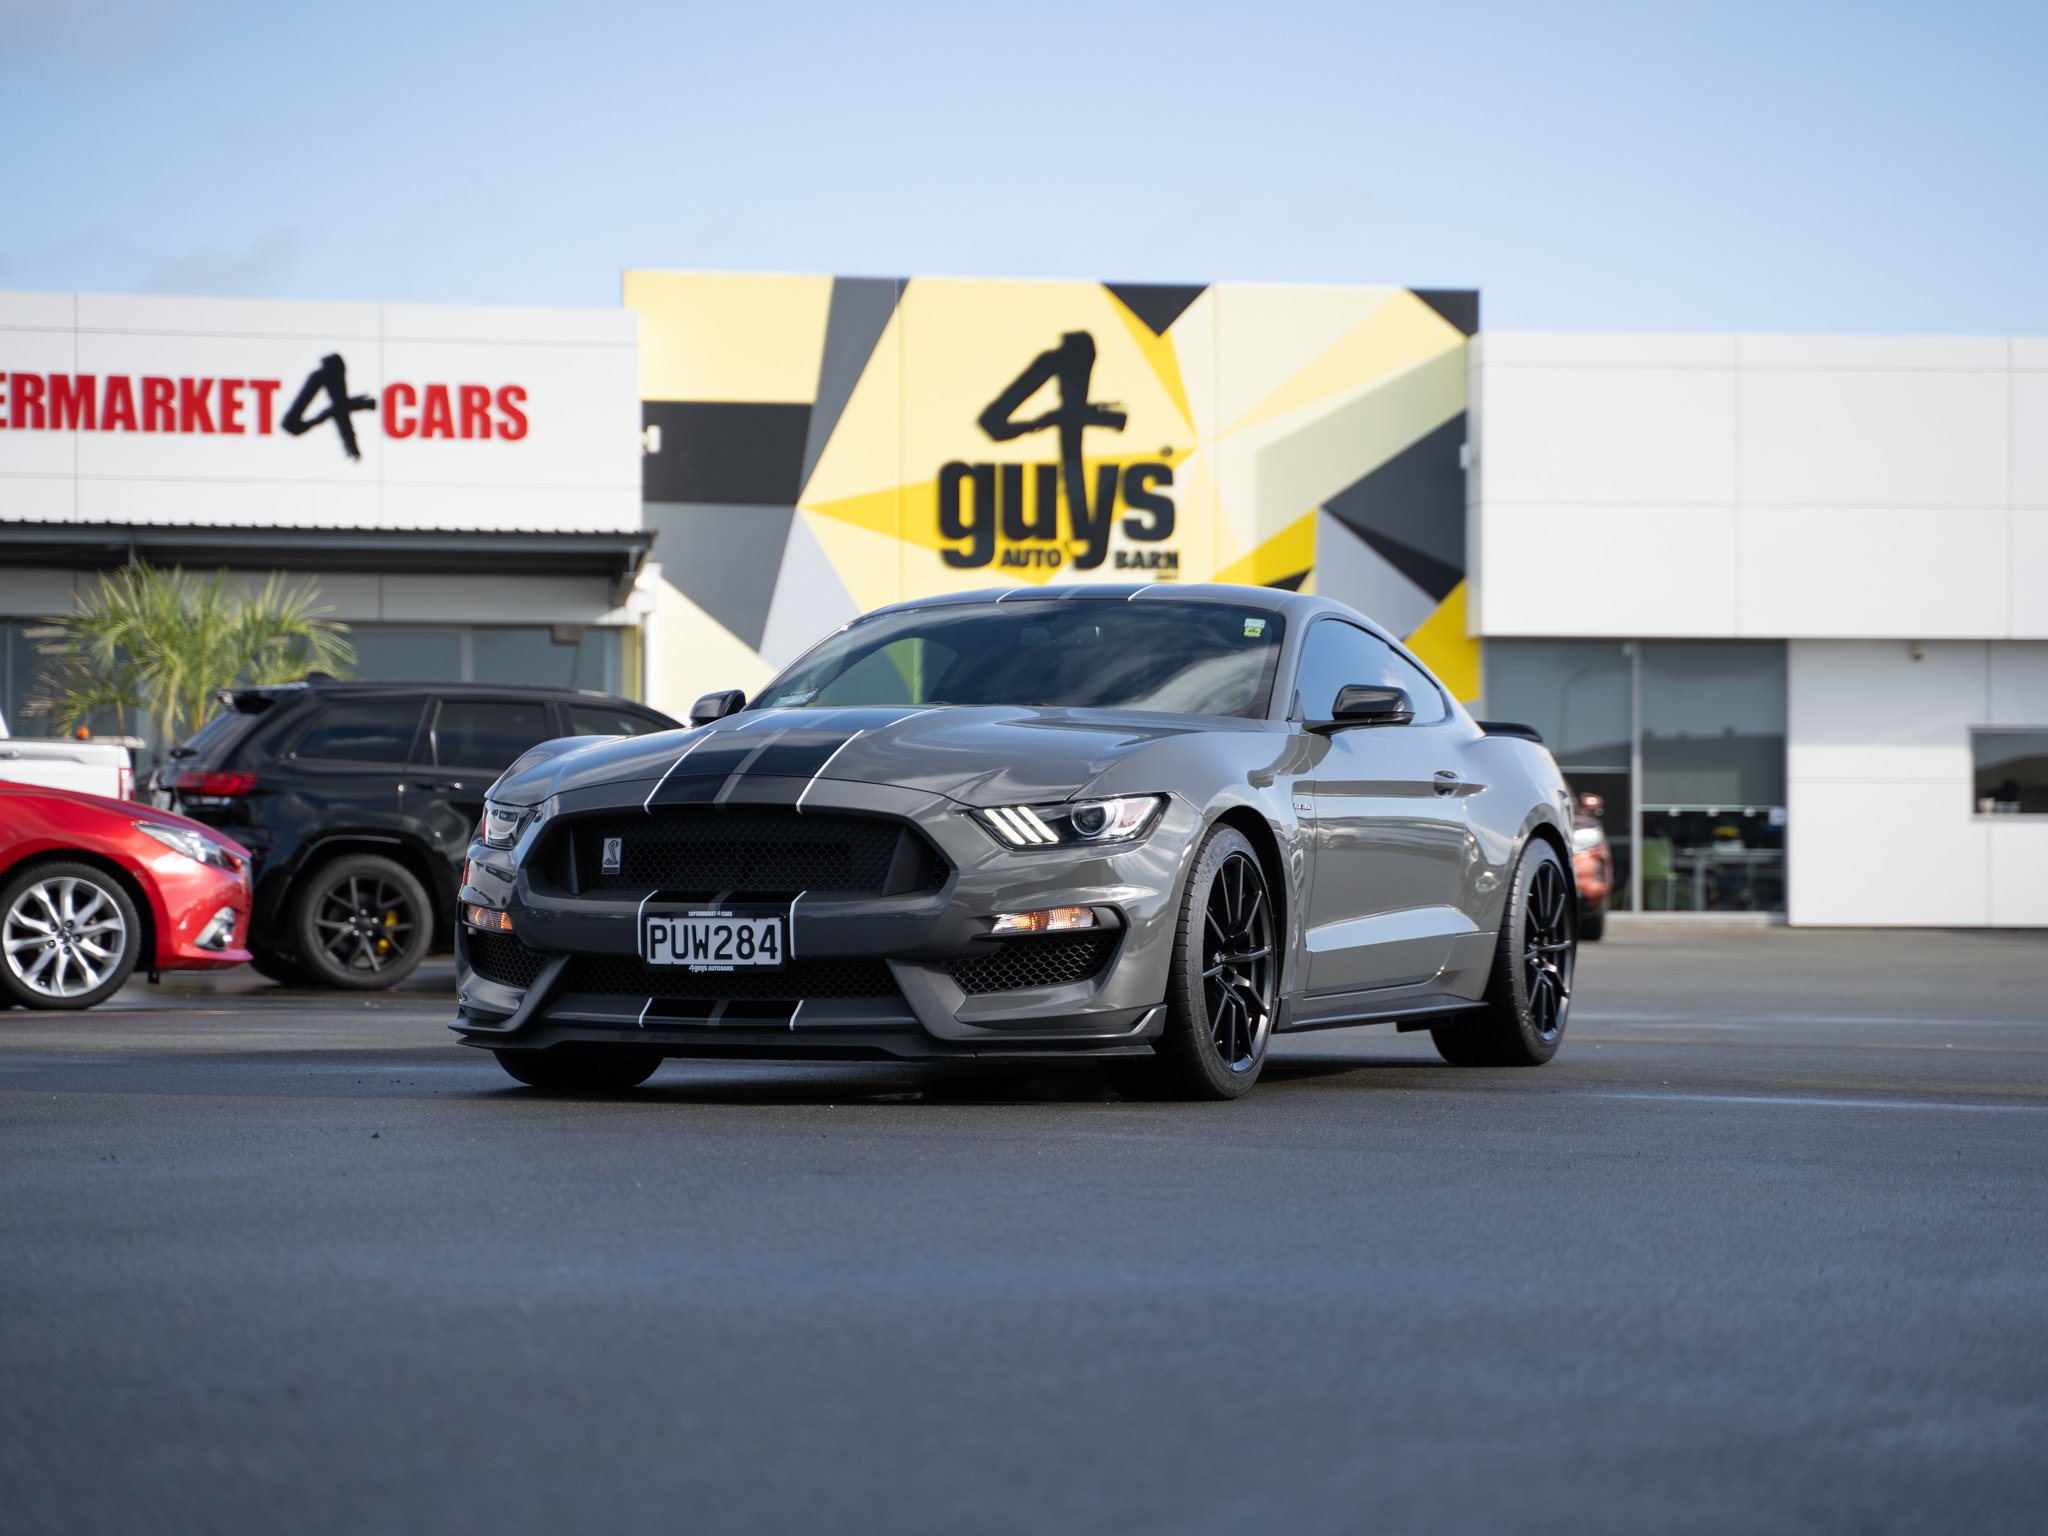 🔥 Unleash the beast! The 2018 Ford Mustang SHELBY GT350 is here, featuring a ferocious 5.2L V8 engine with 520hp, all harnessed by a precise 6-speed manual transmission. 

Ready to feel the roar? Come test drive your dream! 🚗💨

#4Guys #NewZealand 